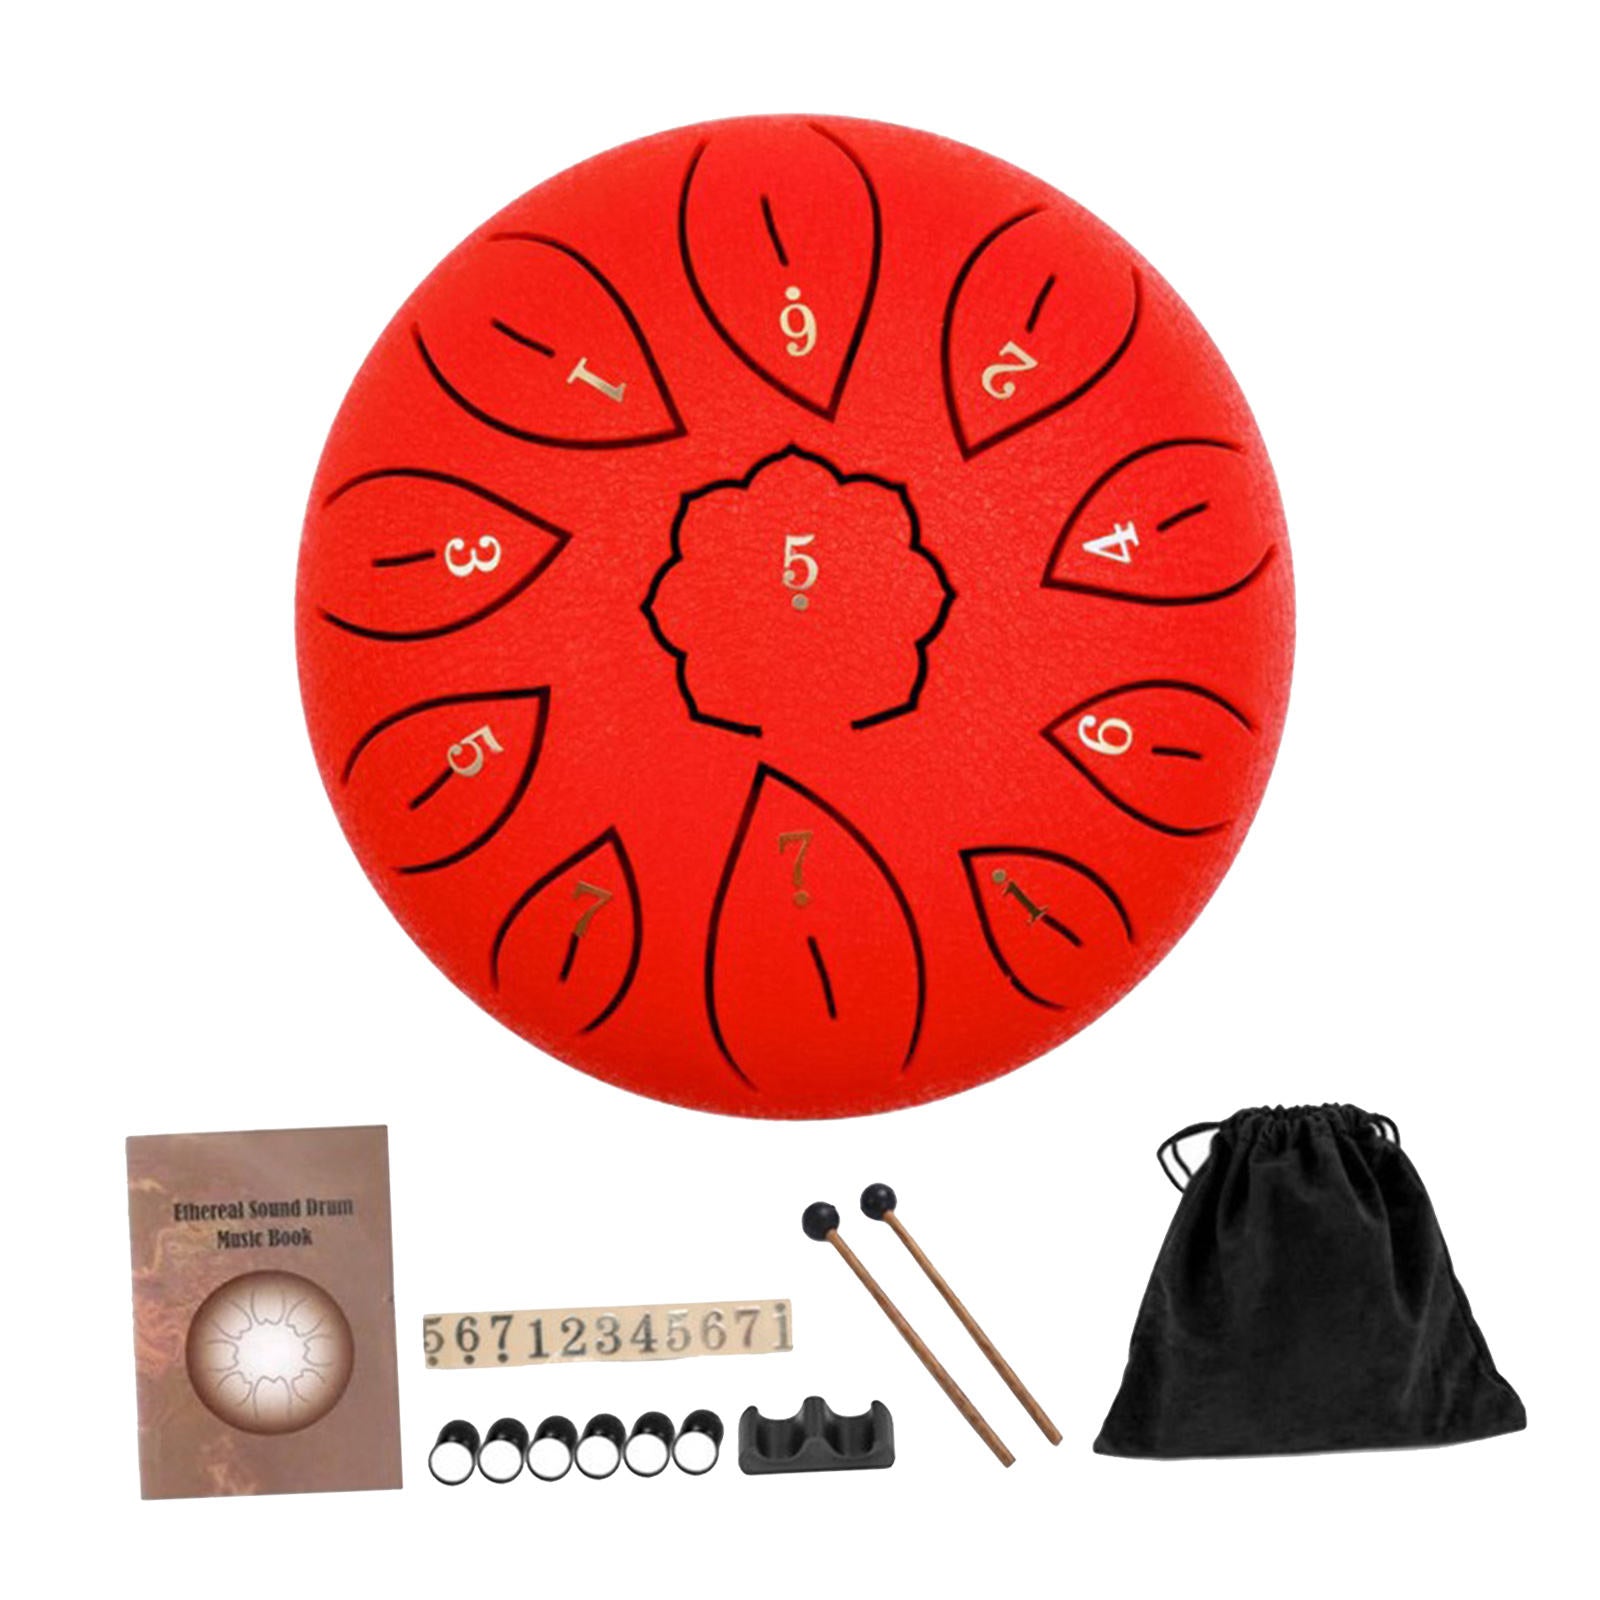 11 Notes 6" Steel Tongue Drum Hand Pan w/ Music Book Notes Stickers Gift red